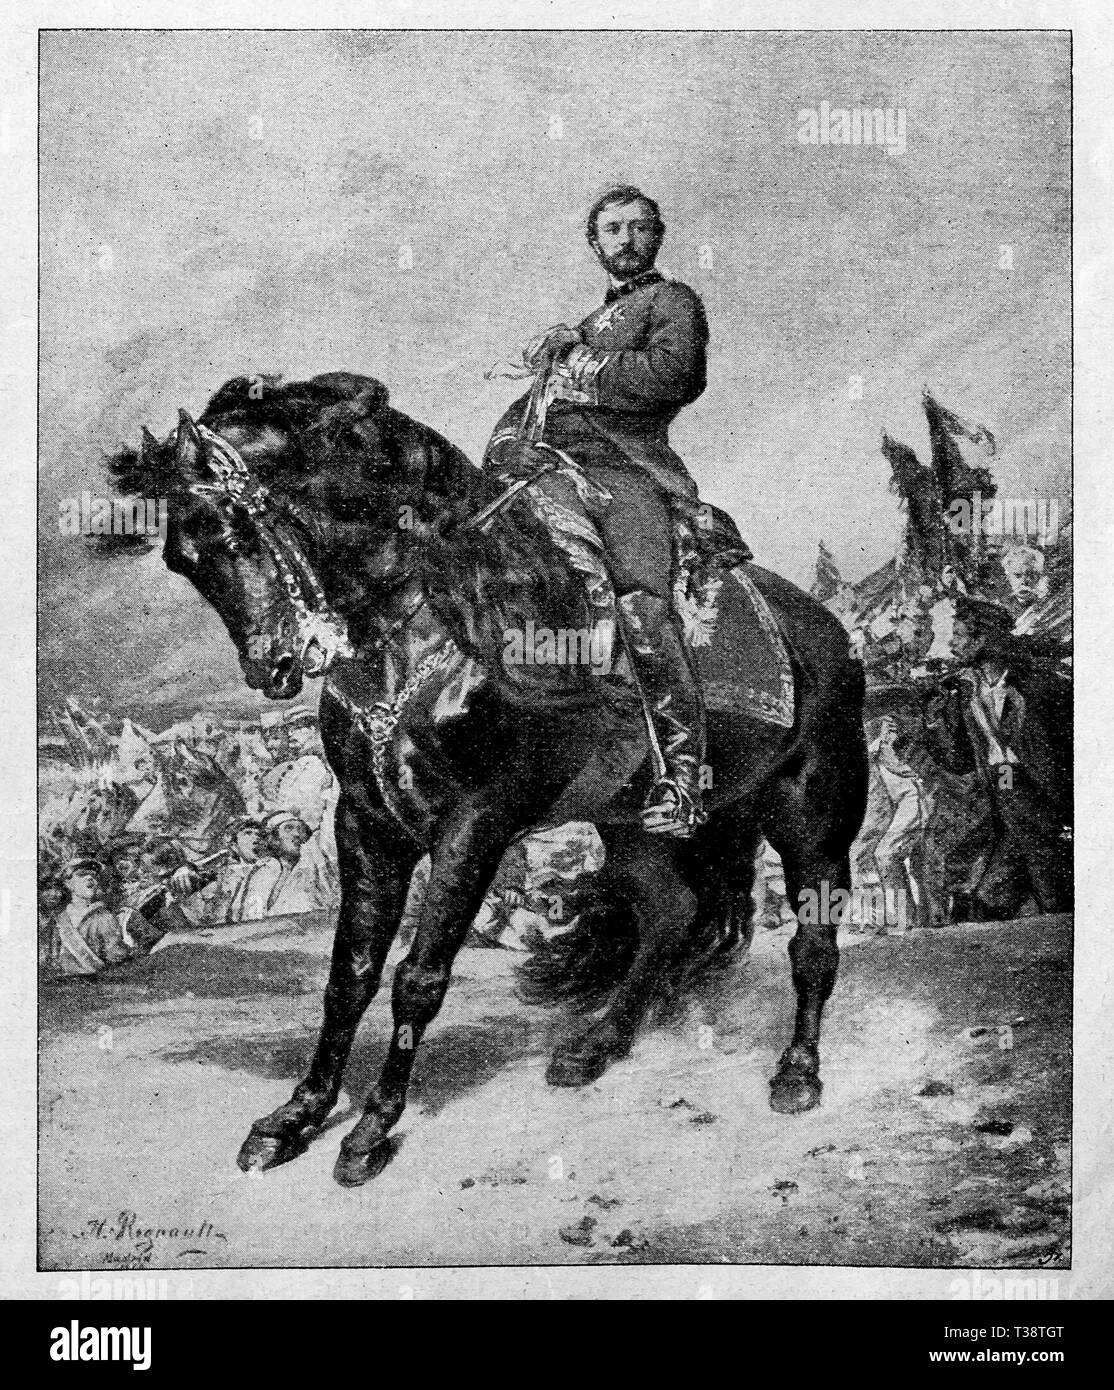 General Juan Prim. Digital improved reproduction from Illustrated overview of the life of mankind in the 19th century, 1901 edition, Marx publishing house, St. Petersburg. Stock Photo